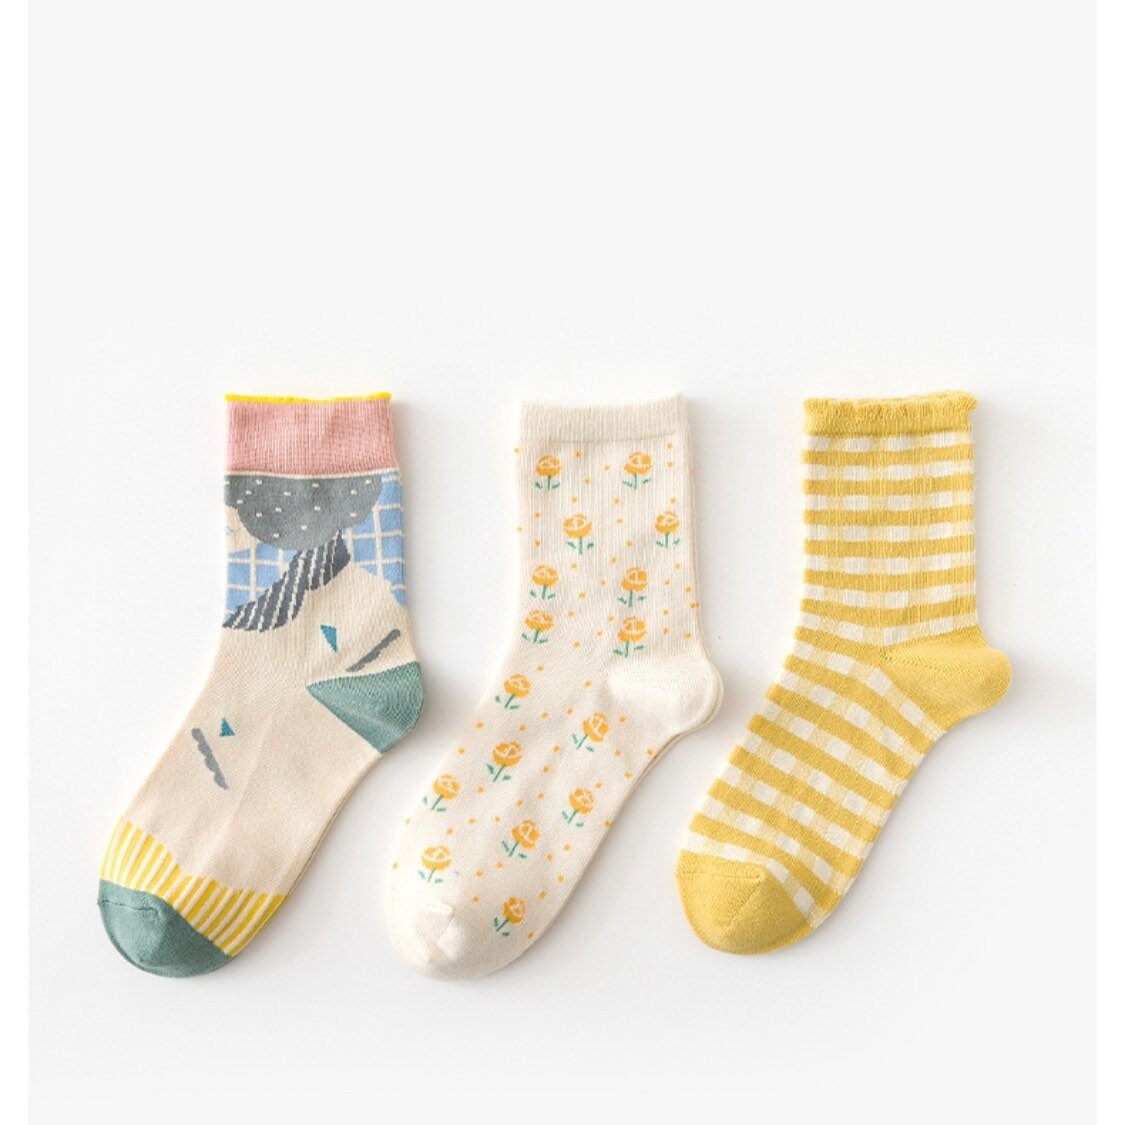 Miss June’s | Set of 3 pair of cotton socks | Cute | Colorful | Cool | Patterned | Designed | Women | Gift Idea | Casual | Comfortable